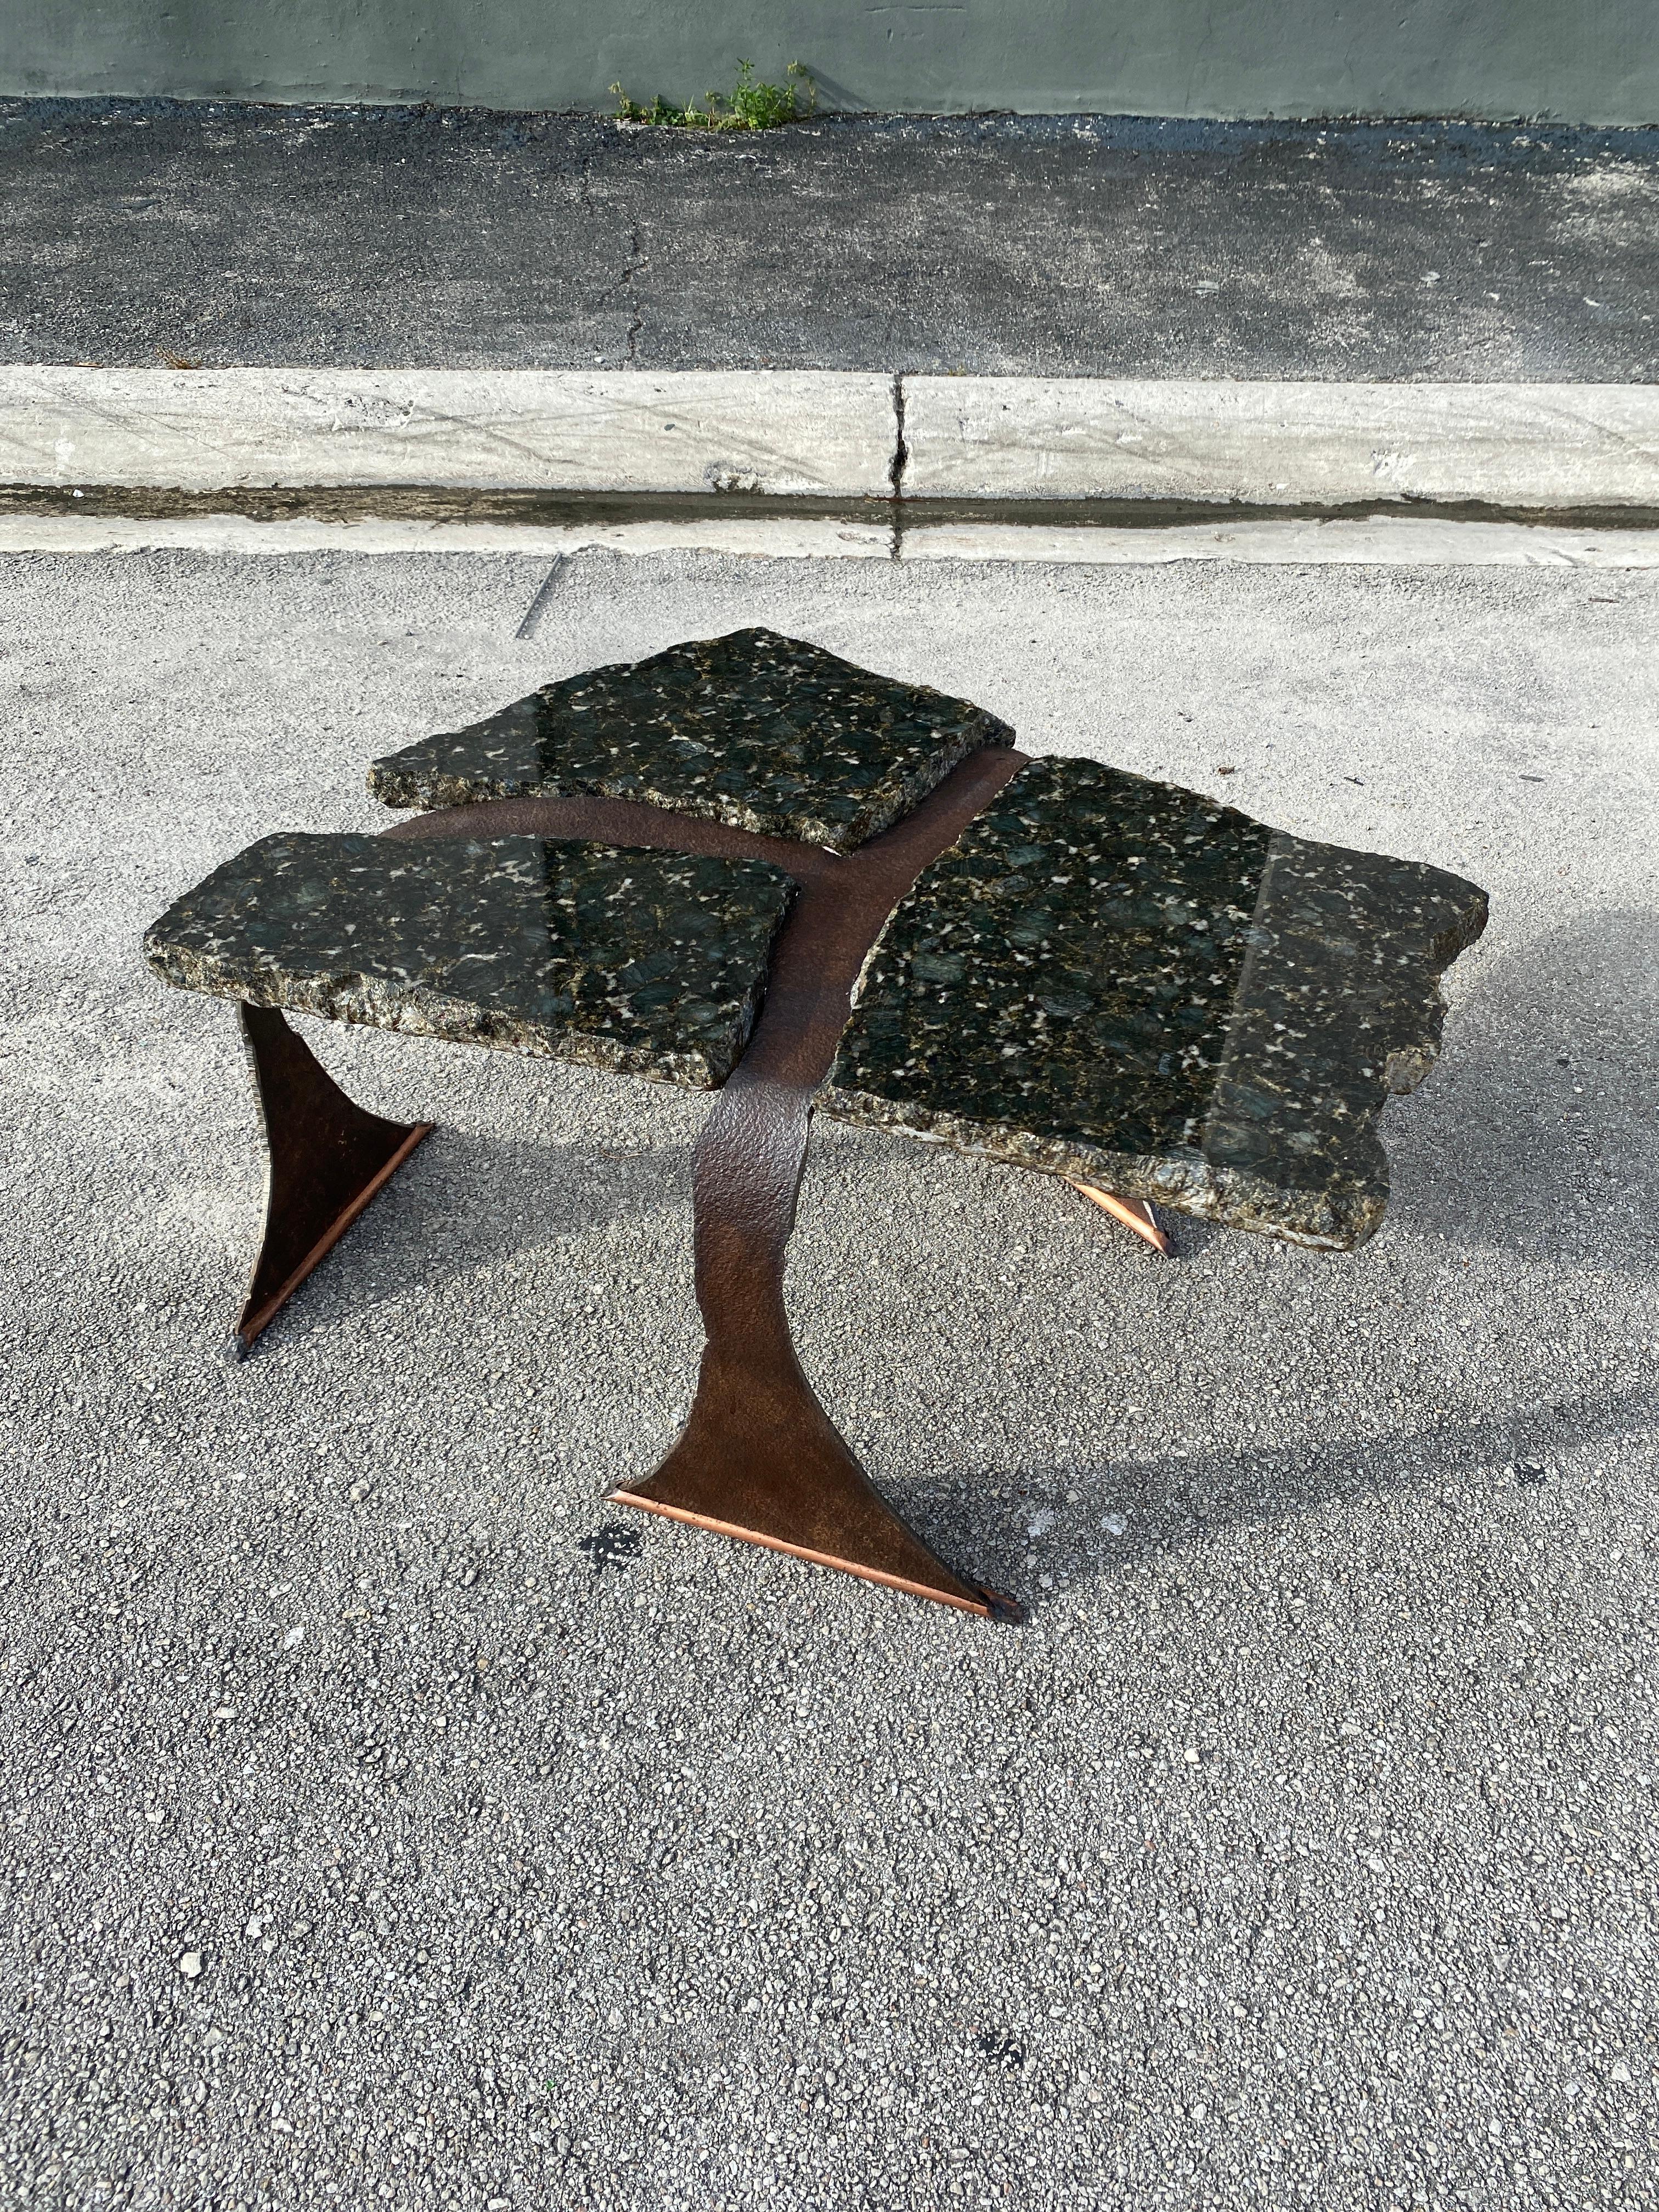 Post Modern Brutalist table made of forged steel with three divisions where thick granite seats on. Made in Canada by unknown artist.

34”W x 23”D x 17”H